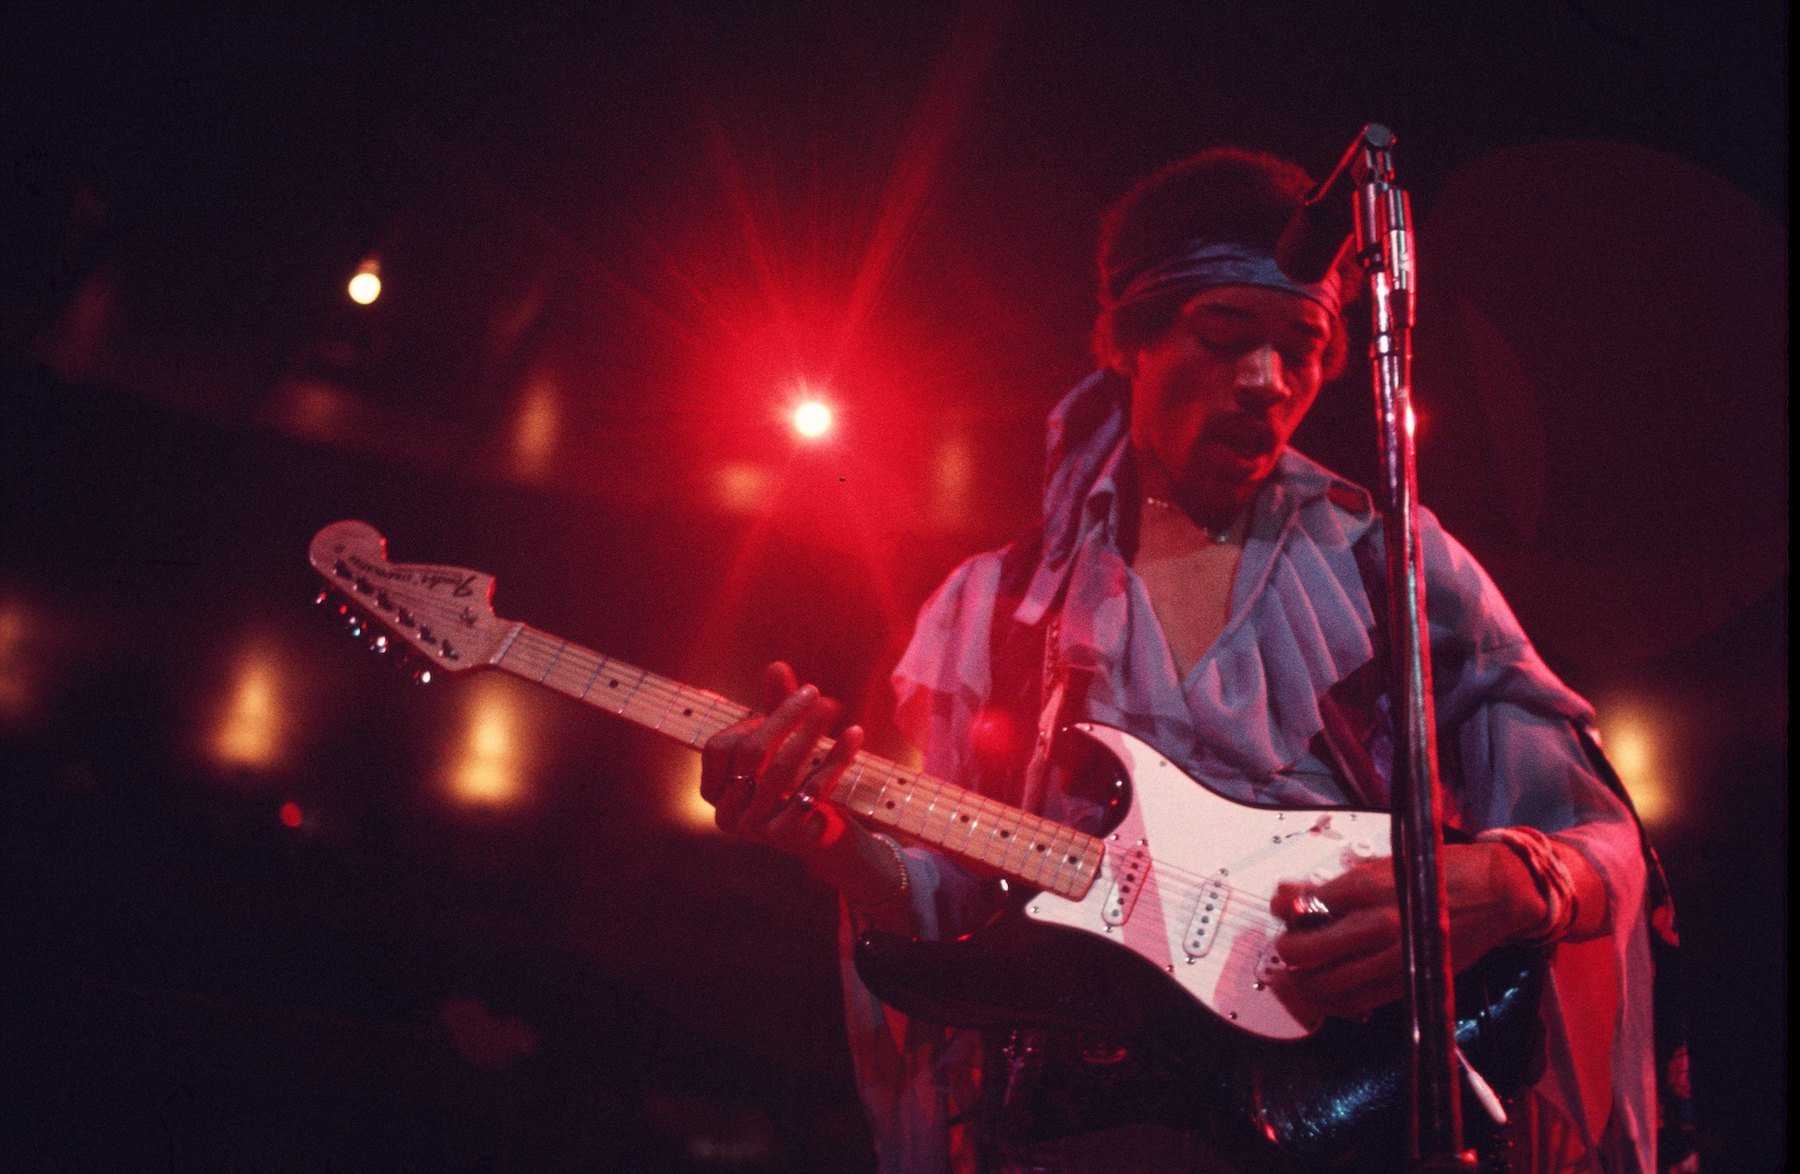 Jimi Hendrix, who looked up to Elvis Presley when he was young, playing guitar